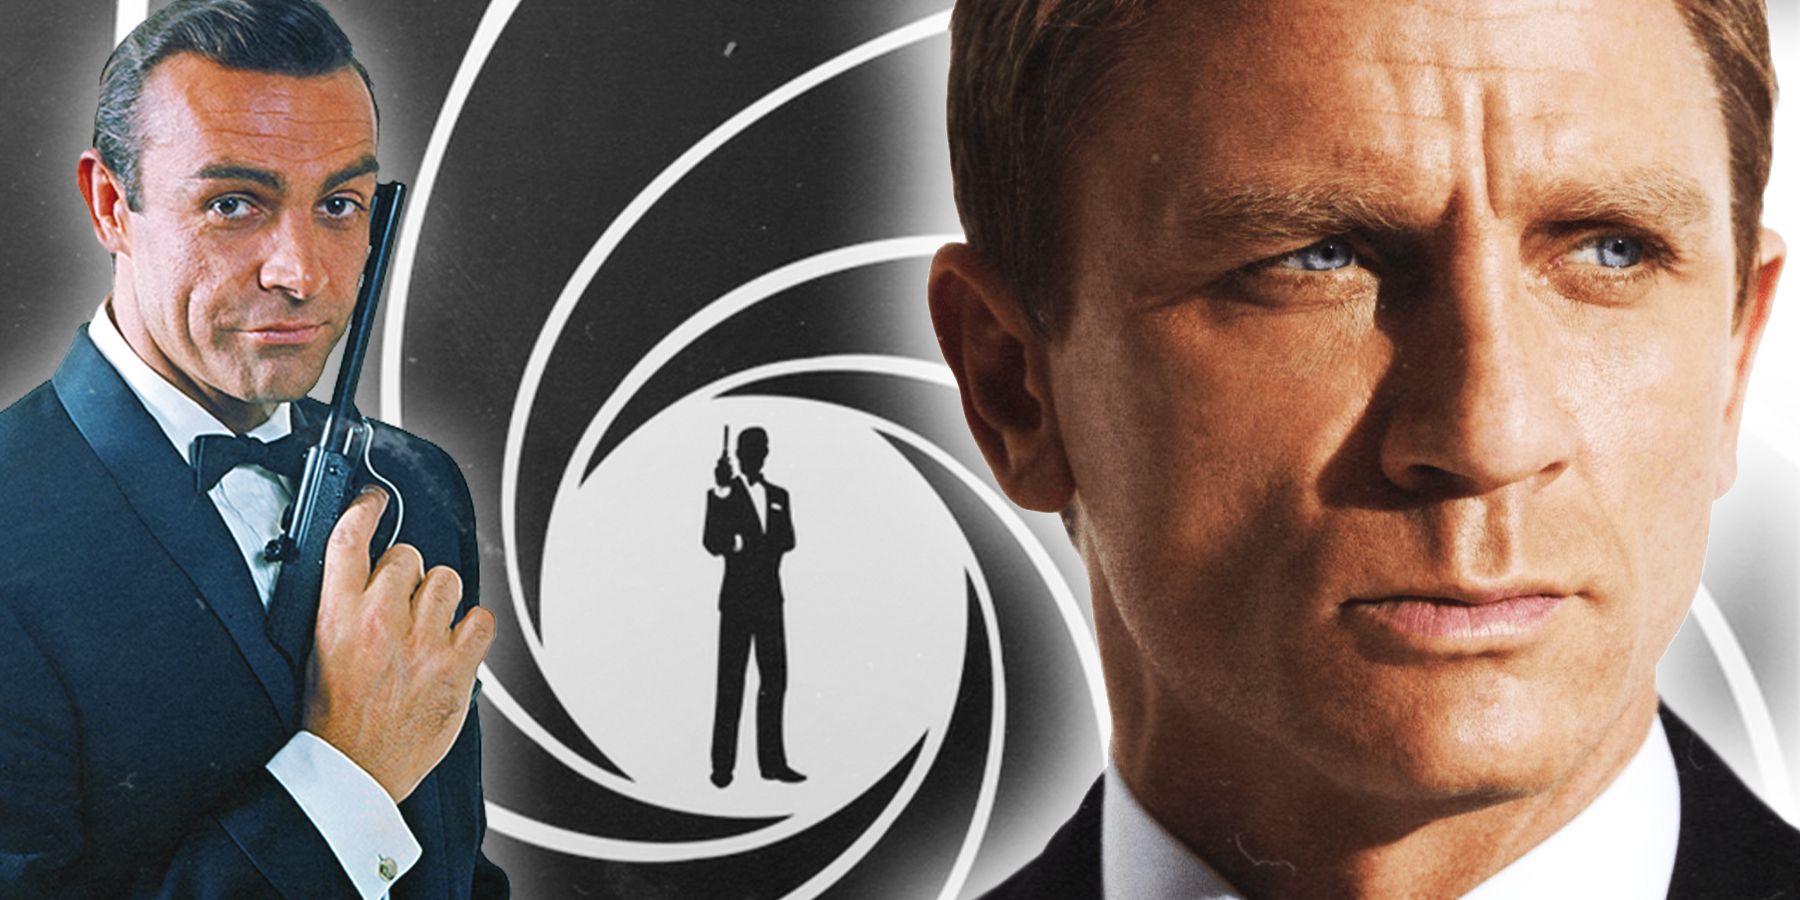 Sean Connery and Daniel Craig both as James Bond in front of the franchises gun barrel logo